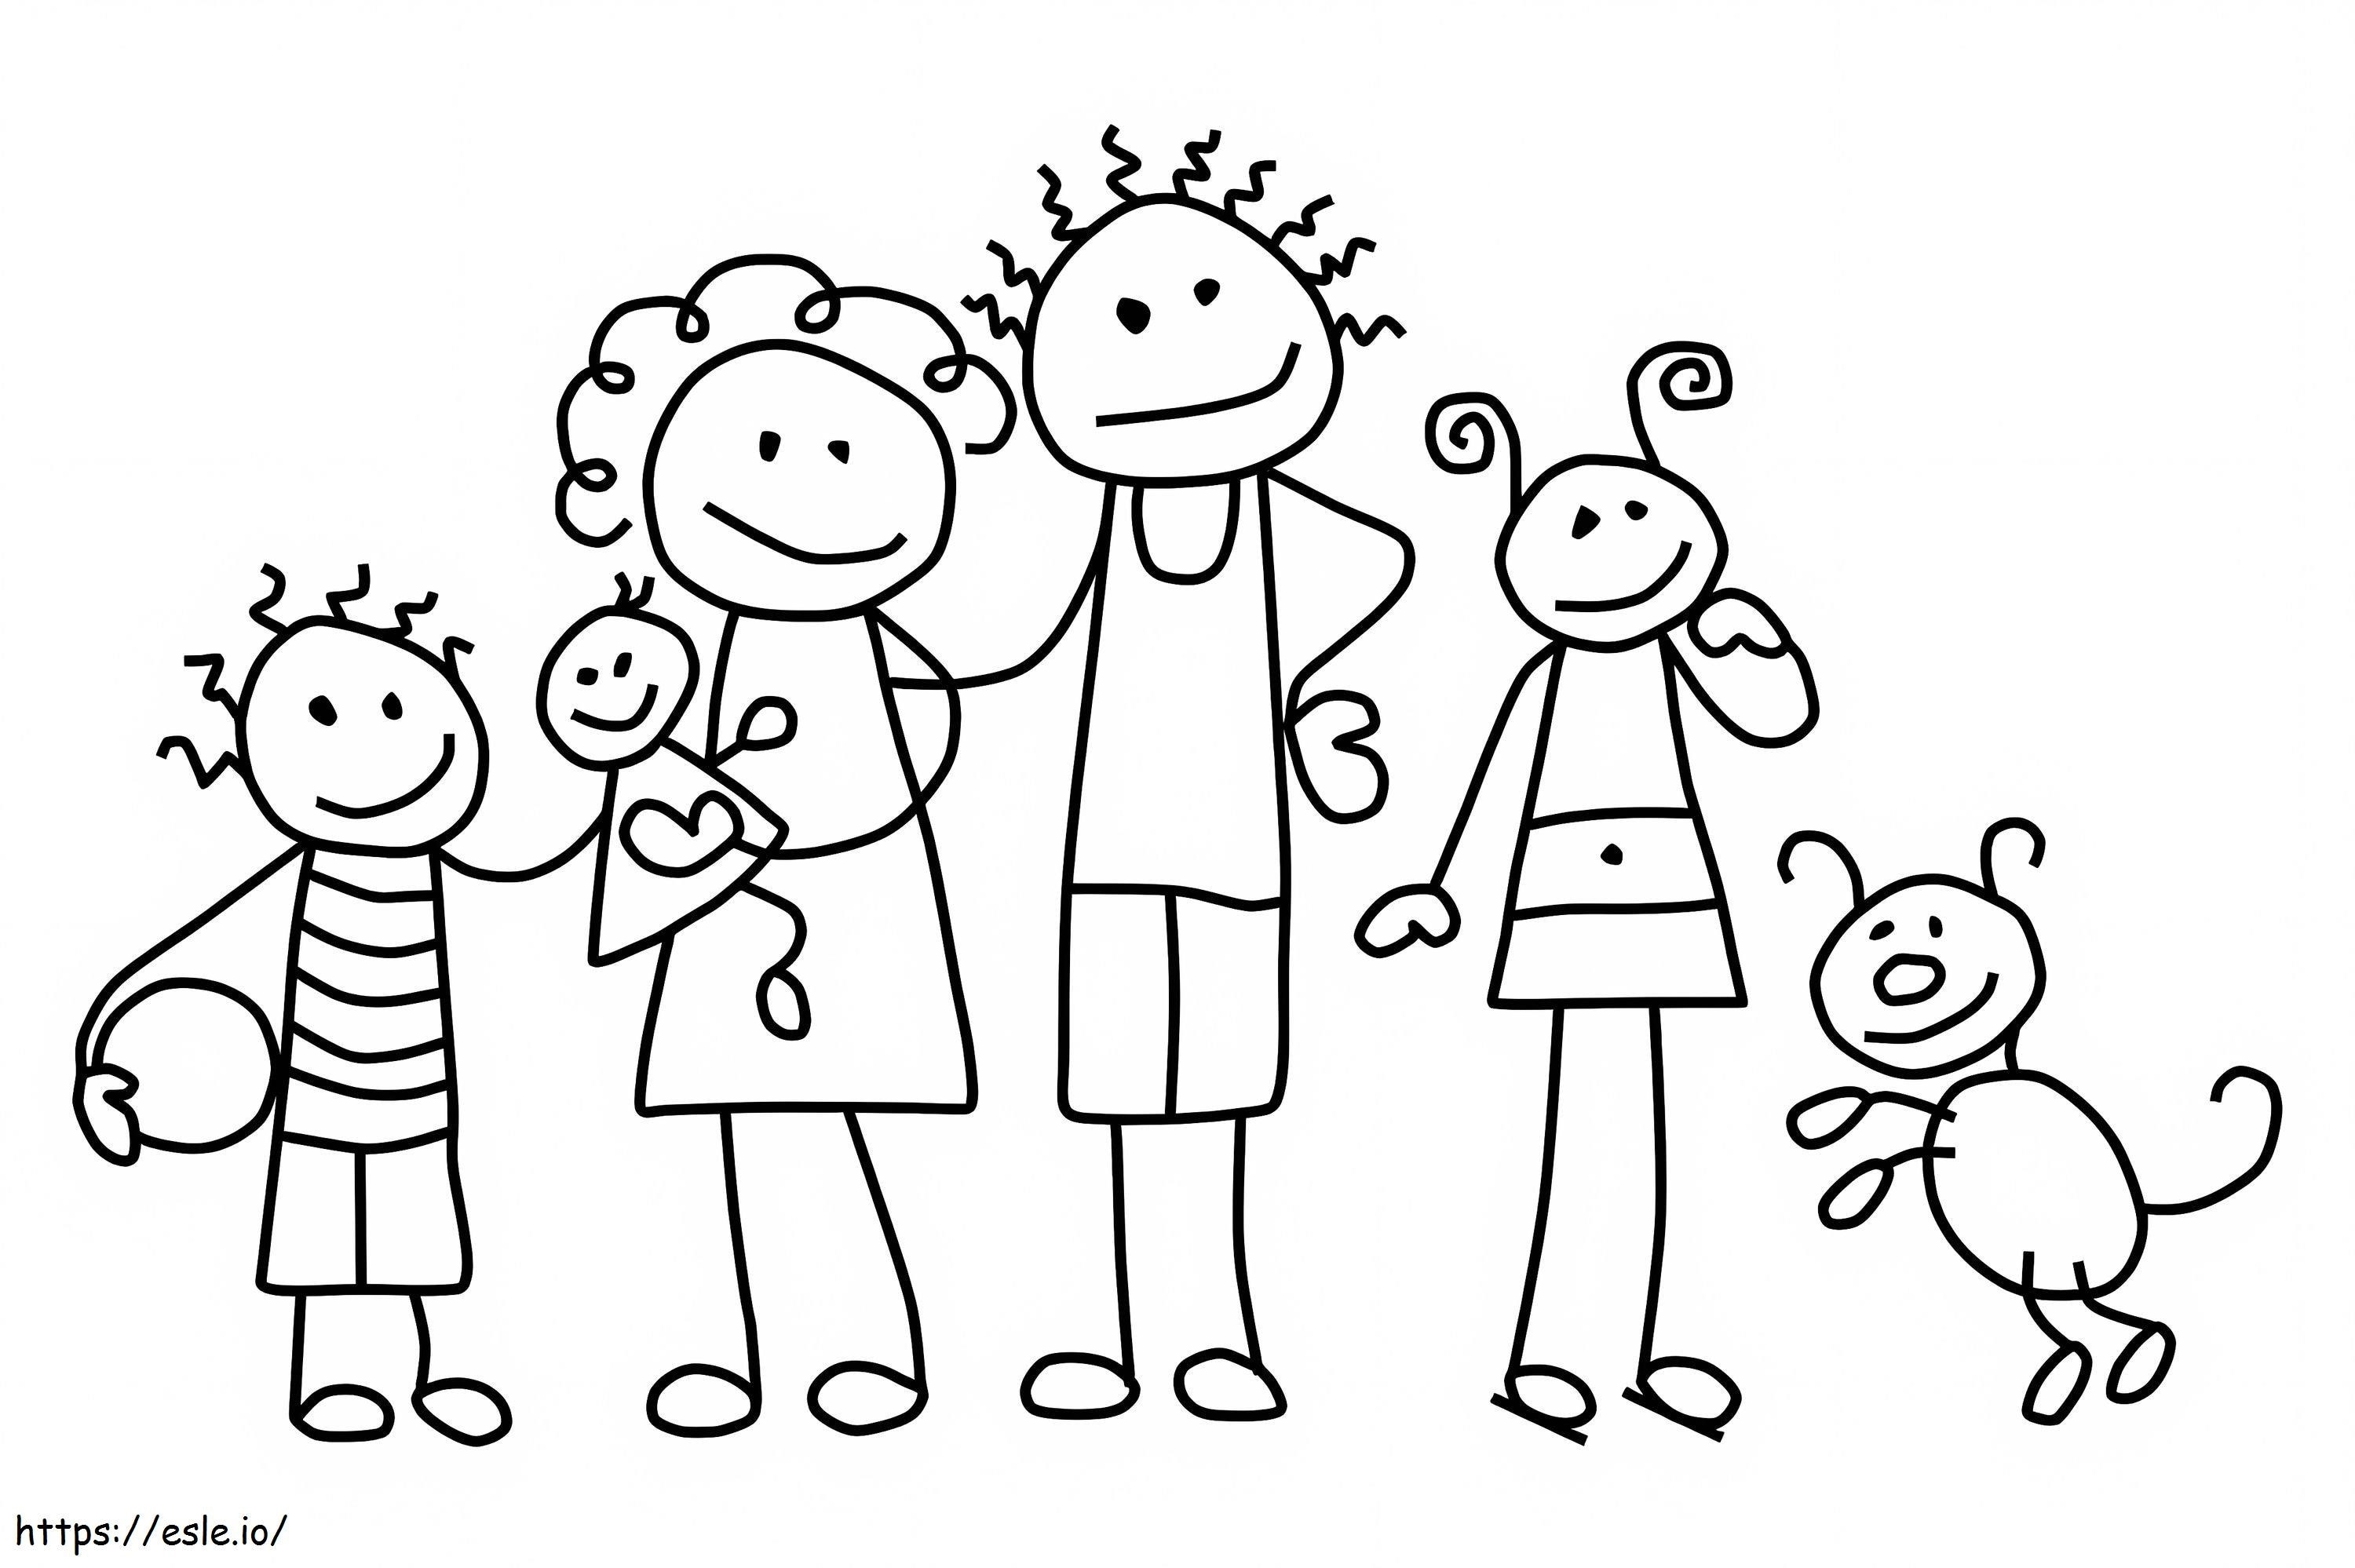 Simple Family coloring page